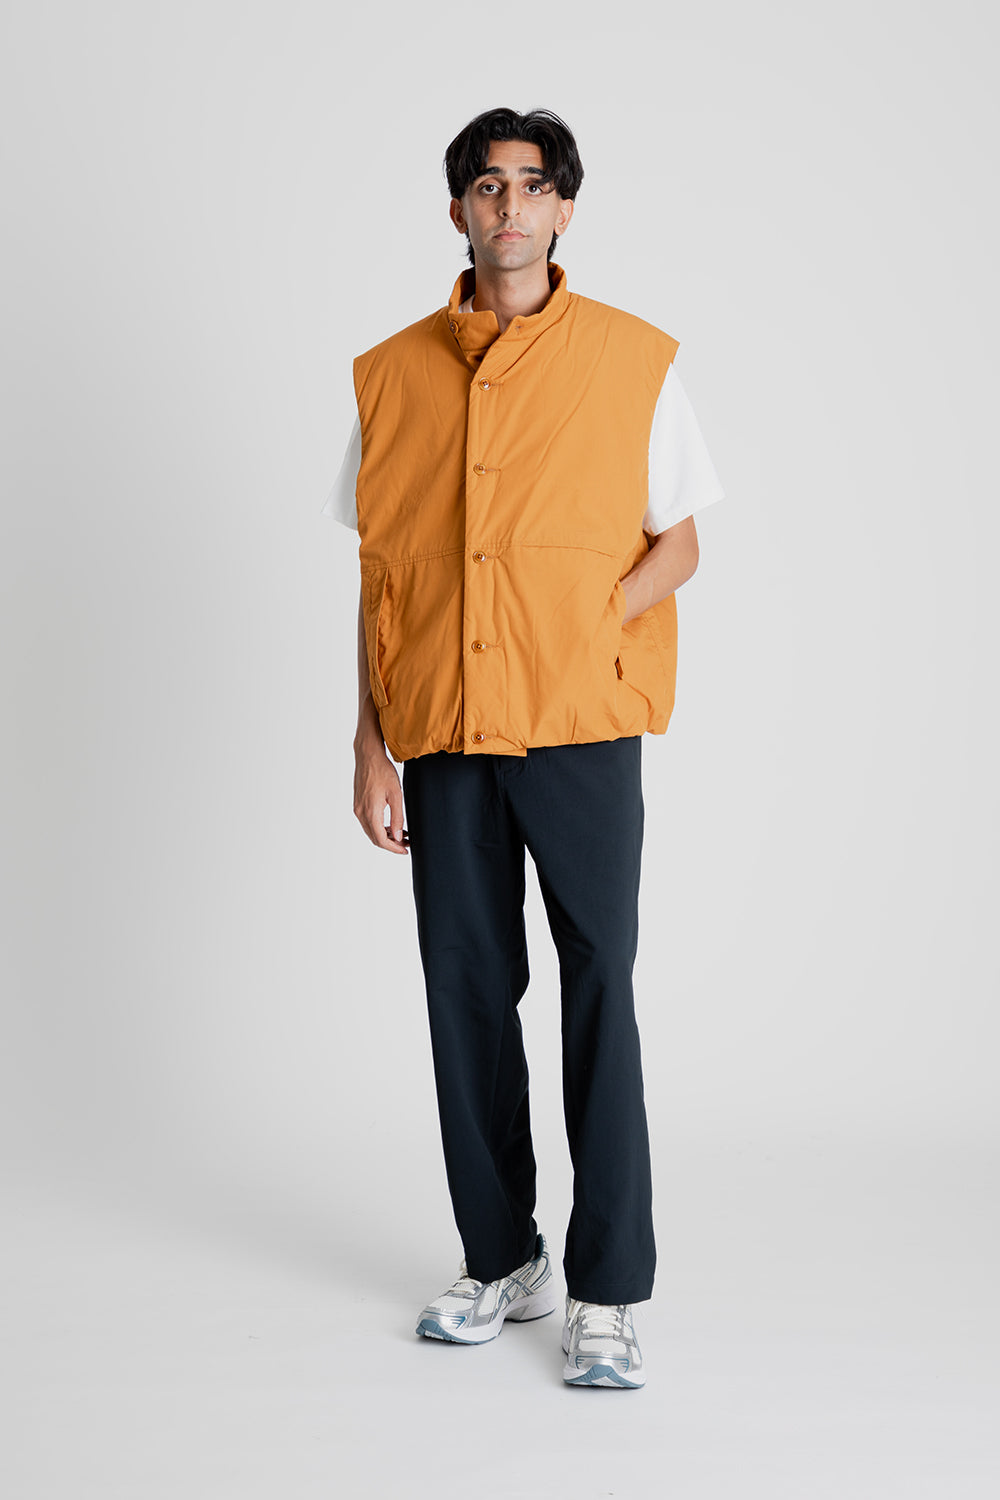 Nanamica Insulation Vest in Sunset | Wallace Mercantile Shop